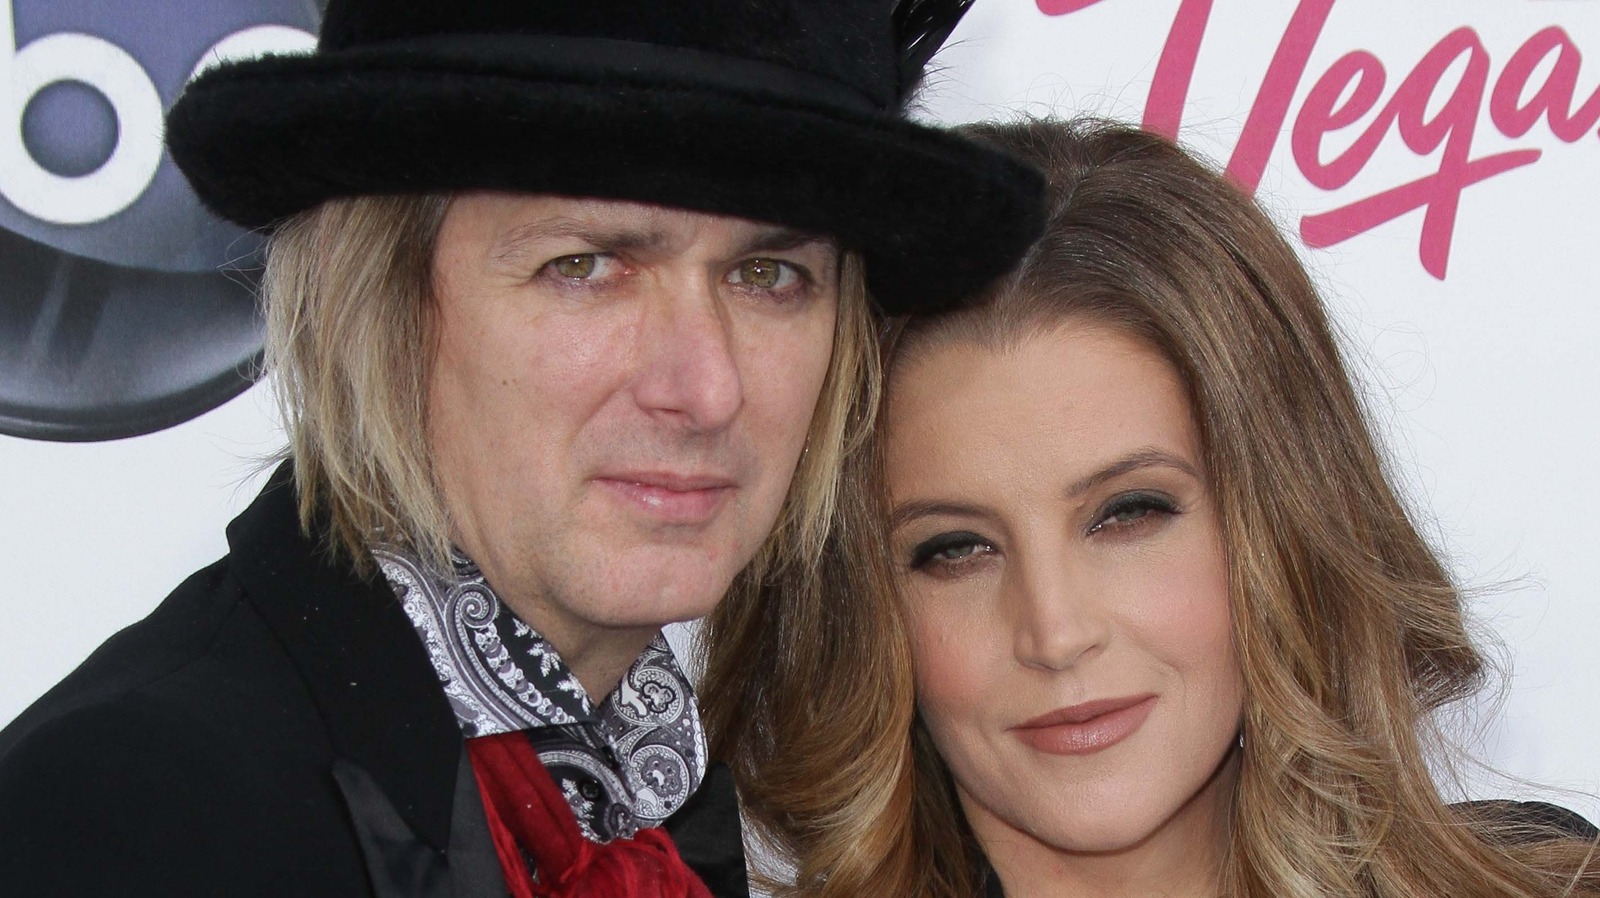 Michael Lockwood S Reaction To Ex Lisa Marie Presley S Death Gives Update On Their Twin Daughters